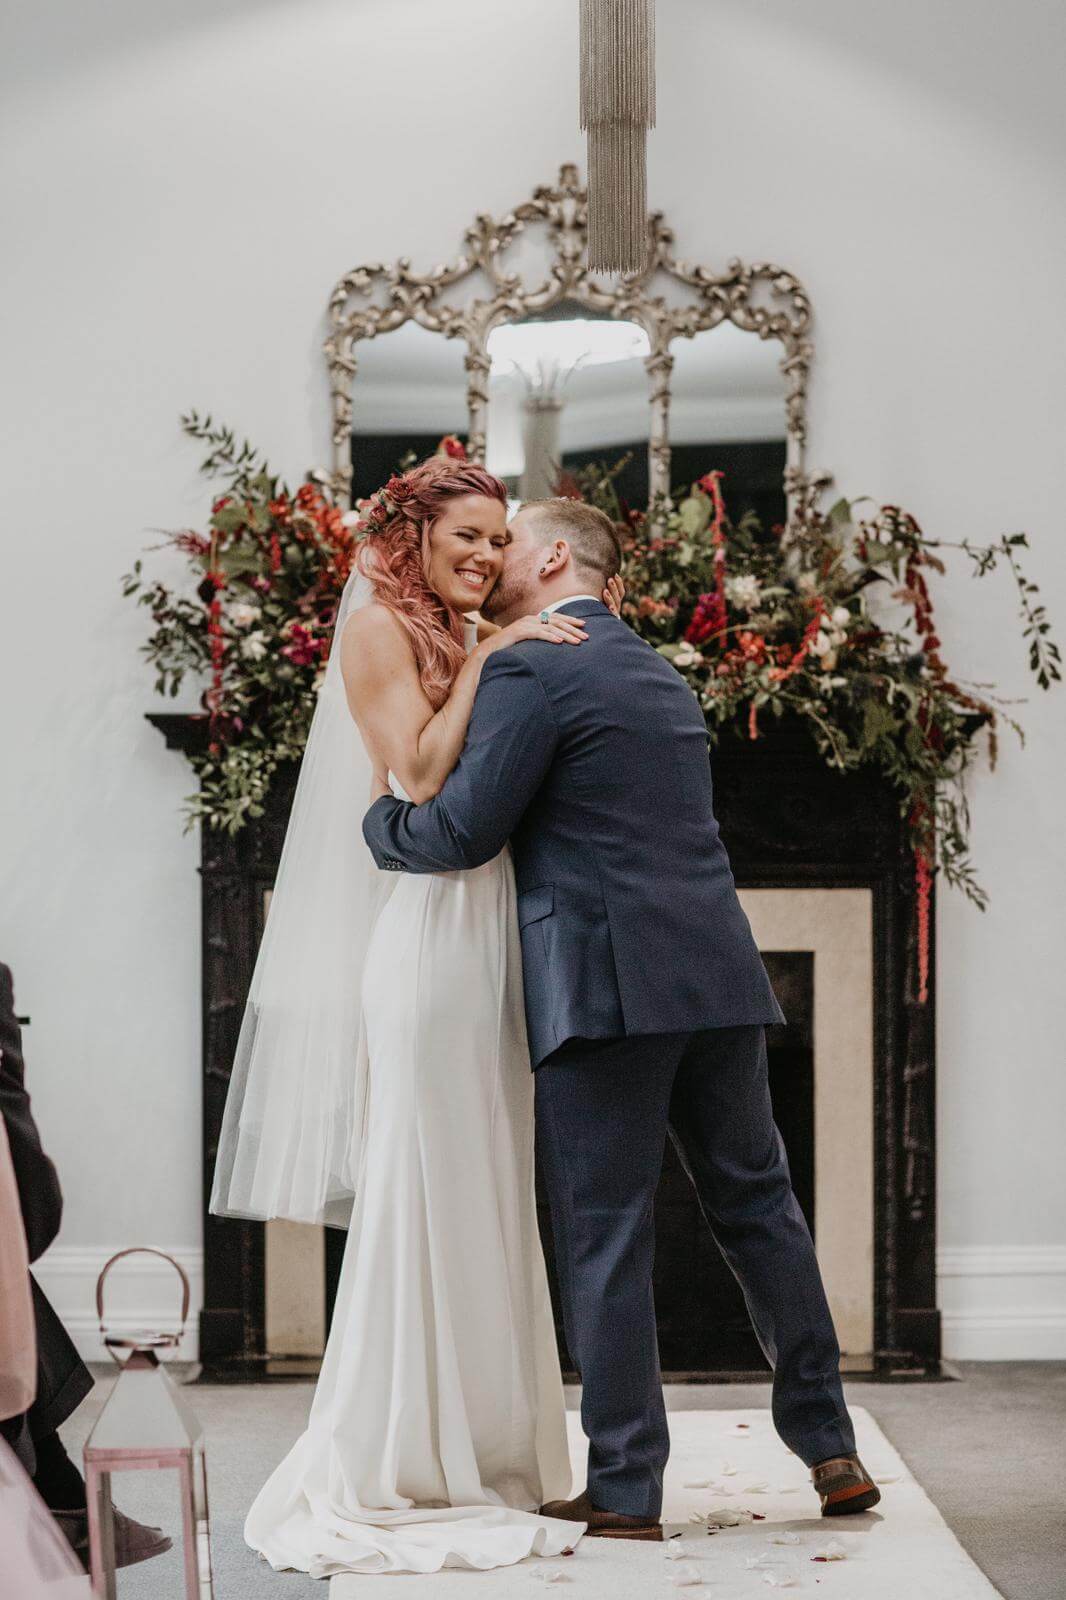 Bride and groom kissing after just getting married in front of the ornate fireplace with autumnal coloured flowers on the mantlepiece in the Study at Swynford Manor